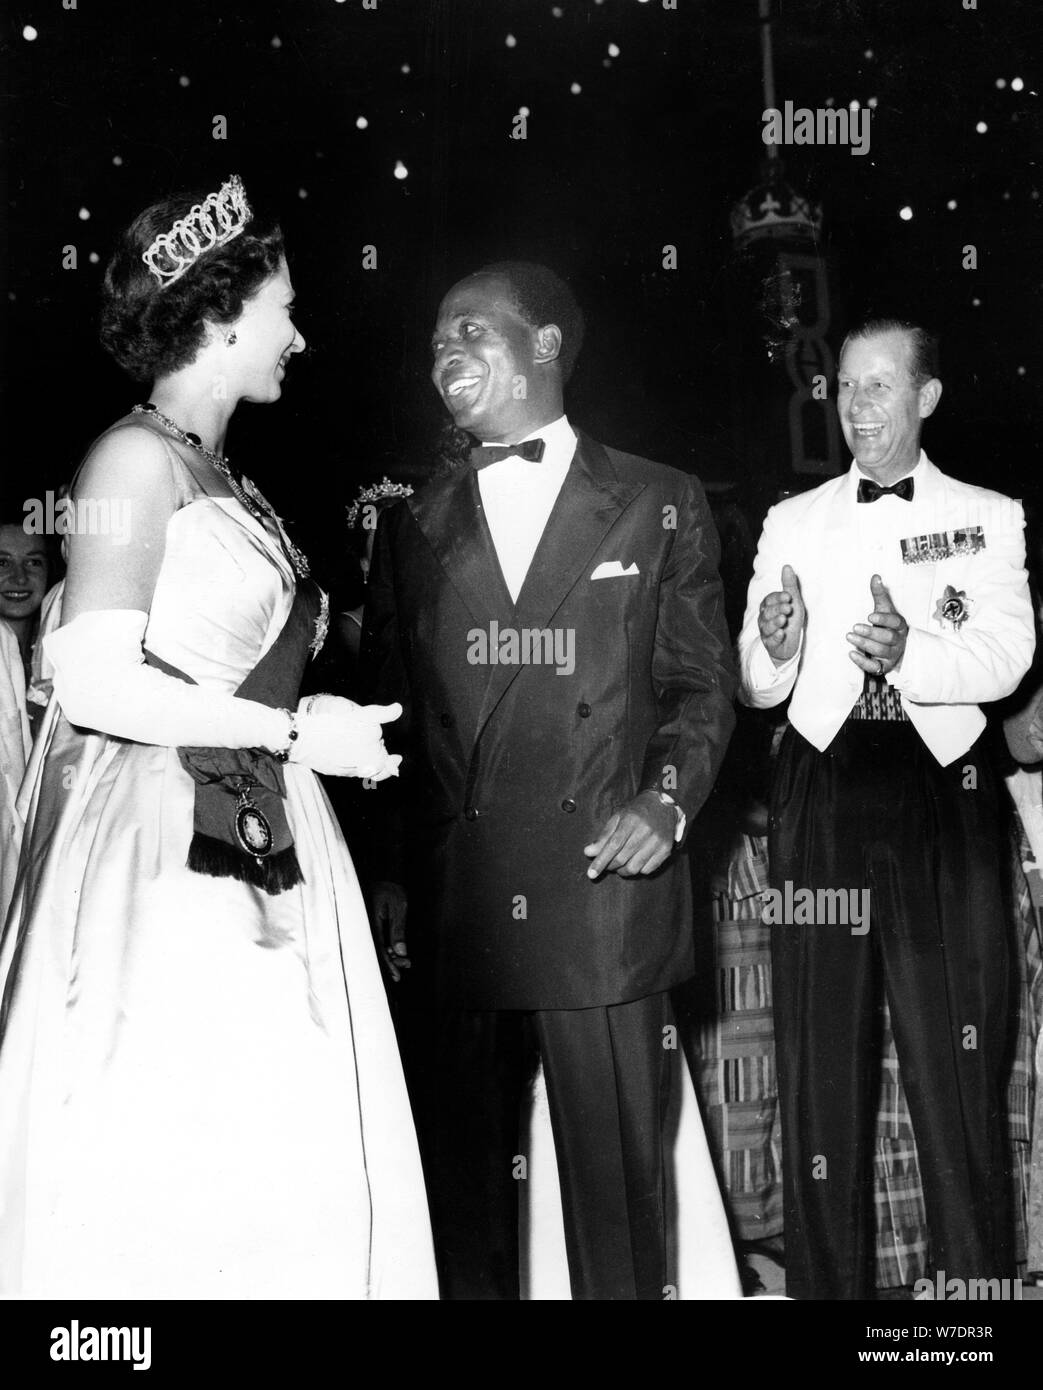 Queen Elizabeth II with Dr Kwame Nkrumah at a gala ball, Accra, Ghana, c1960s. Creator: Unknown. Stock Photo